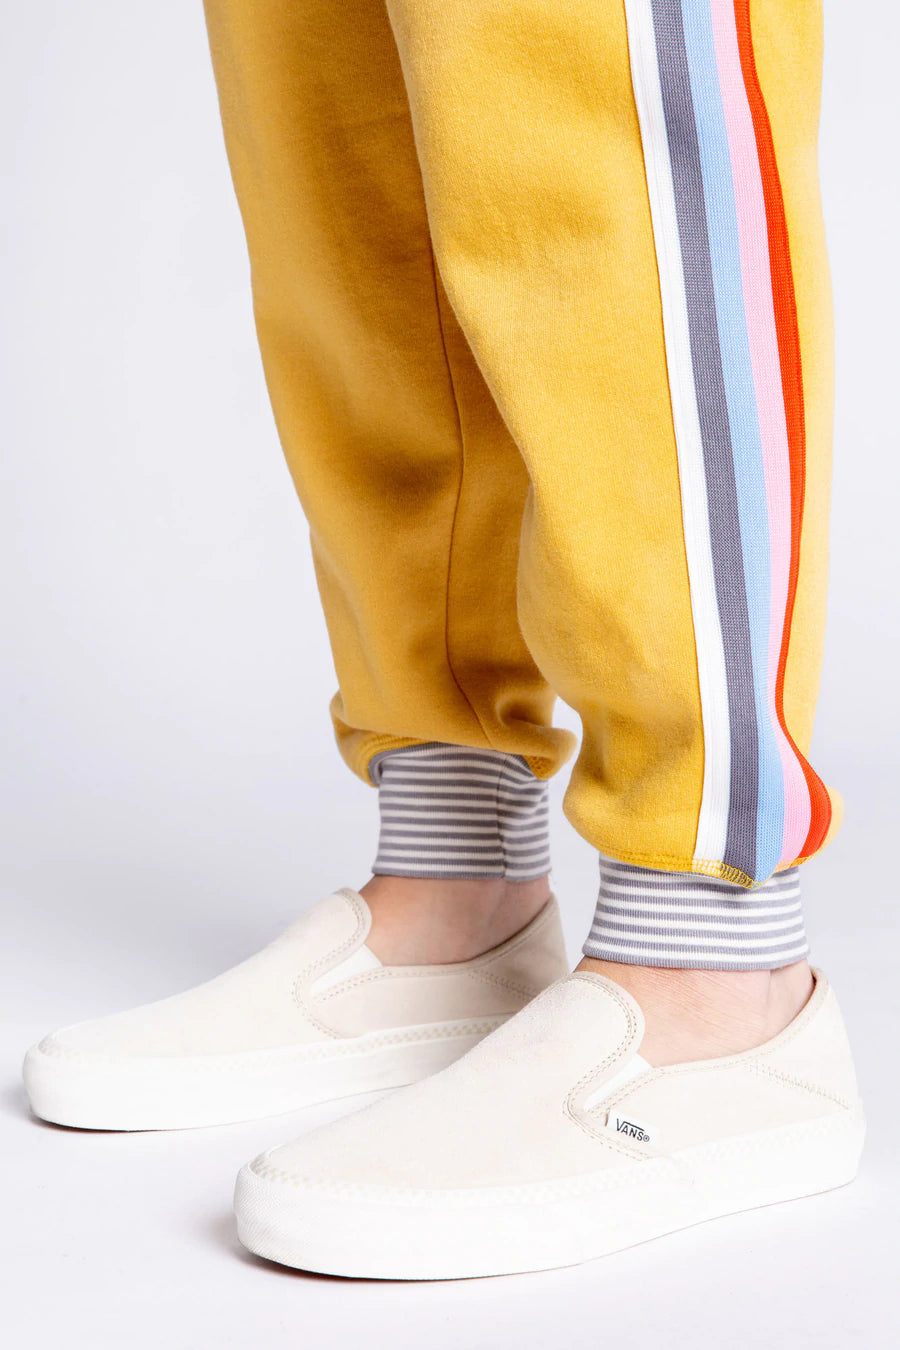 PJ Salvage “Happy Days Are Here” Jogger Gold